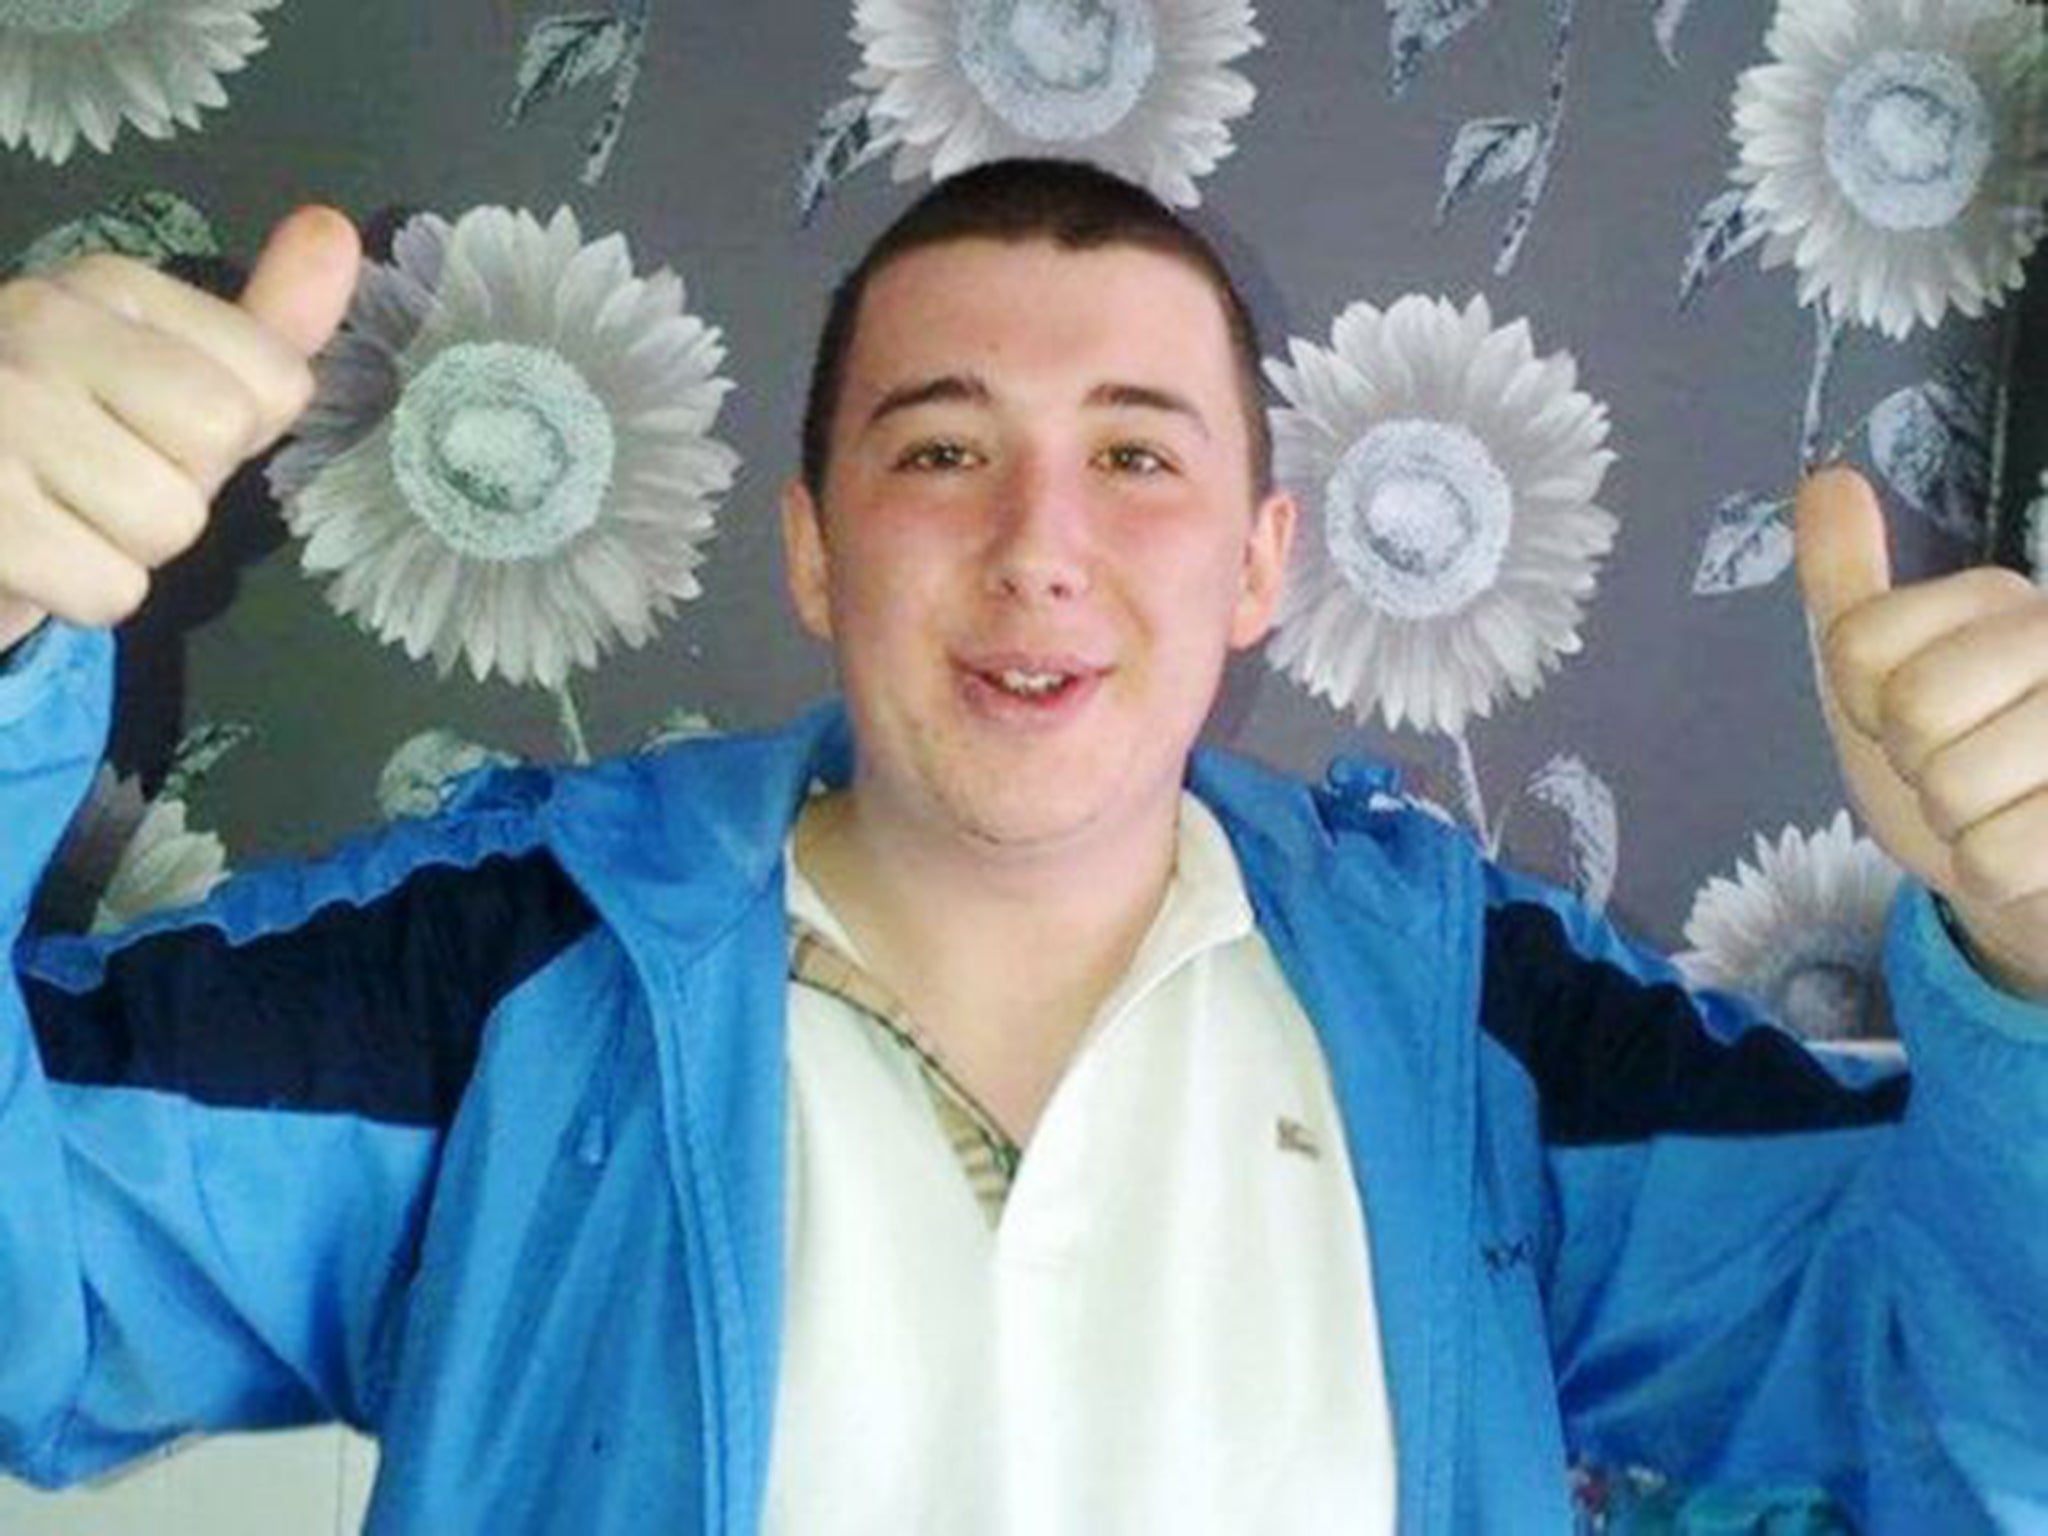 Lee Irving, 24, who had learning difficulties, was found dead on Saturday morning